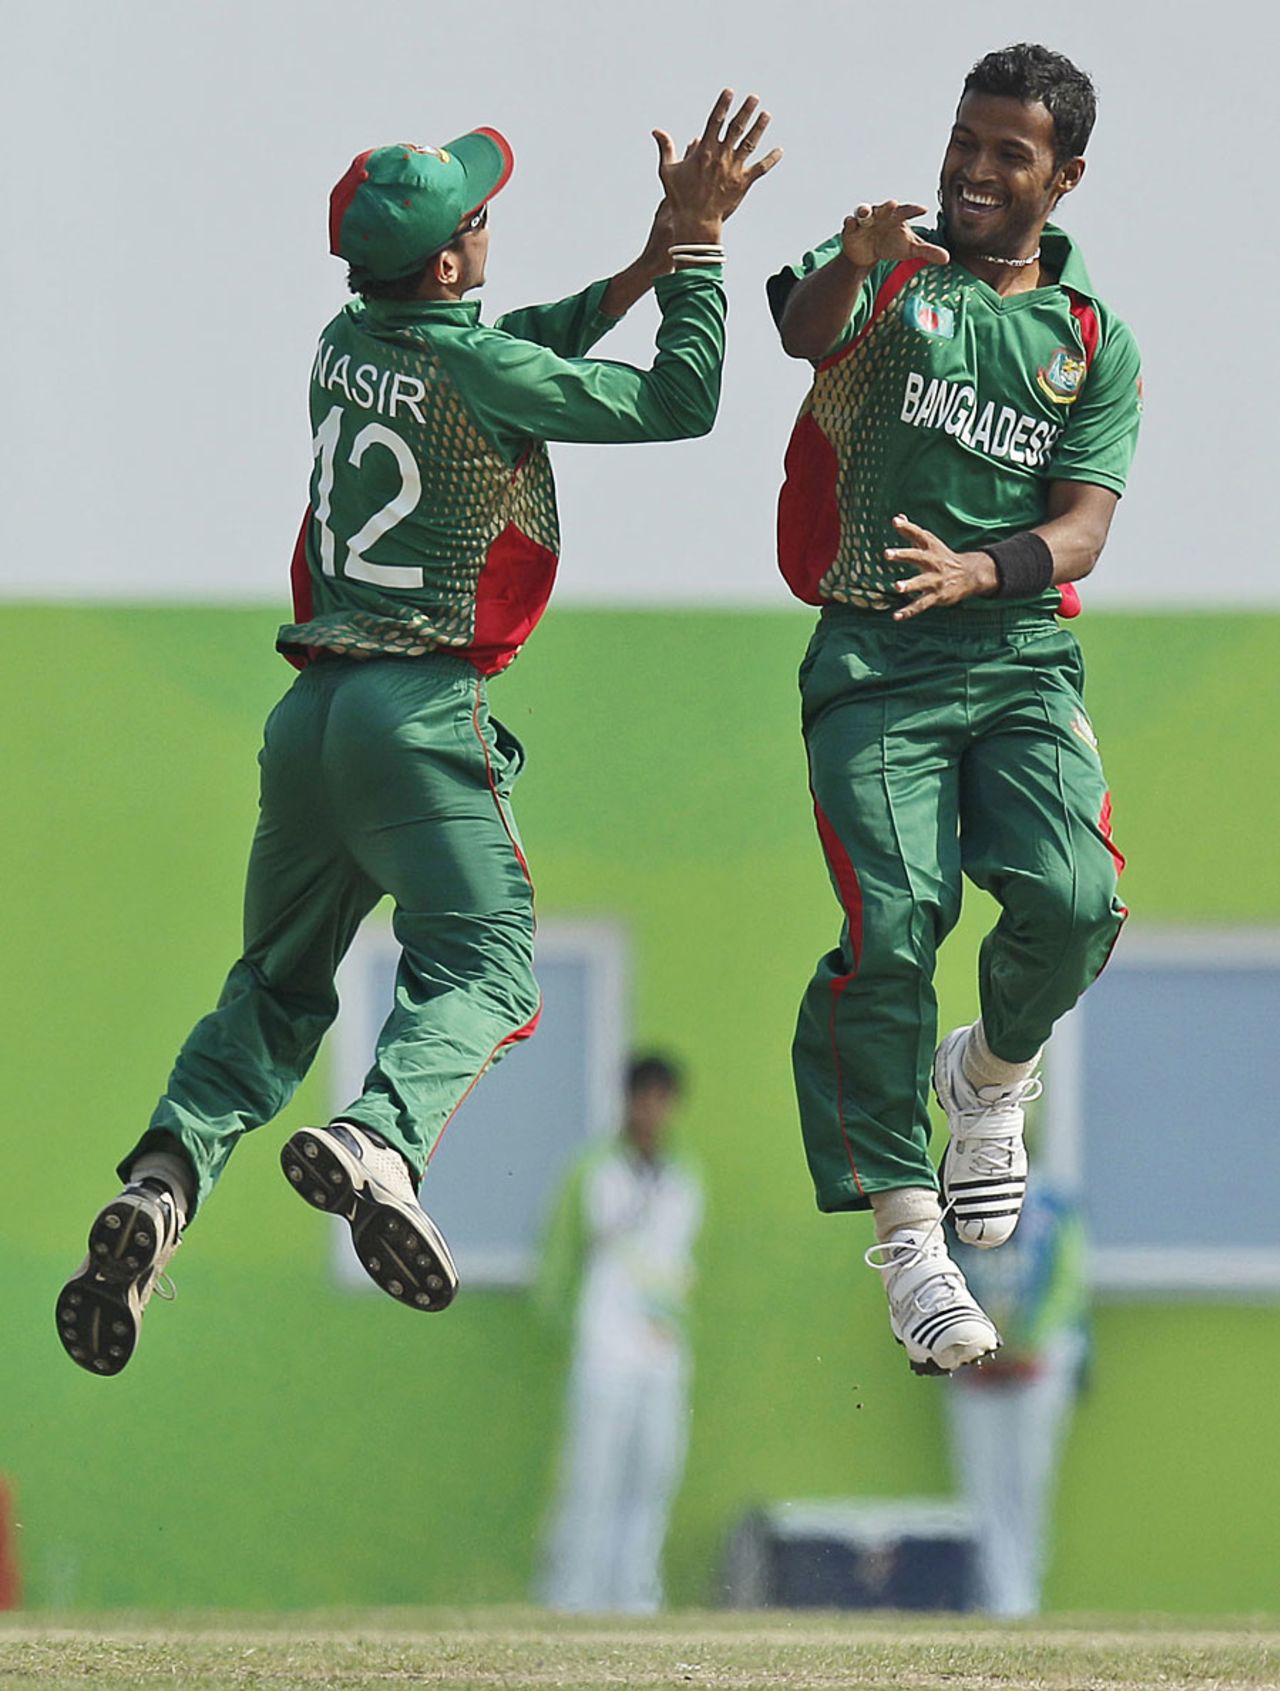 Bangladesh's Nazmul Hossain and Nasir Hossain are mid-air as they celebrate the wicket of Mohammad Shahzad, Afghanistan v Bangladesh, final, Asian Games, Guangzhou, November 26, 2010